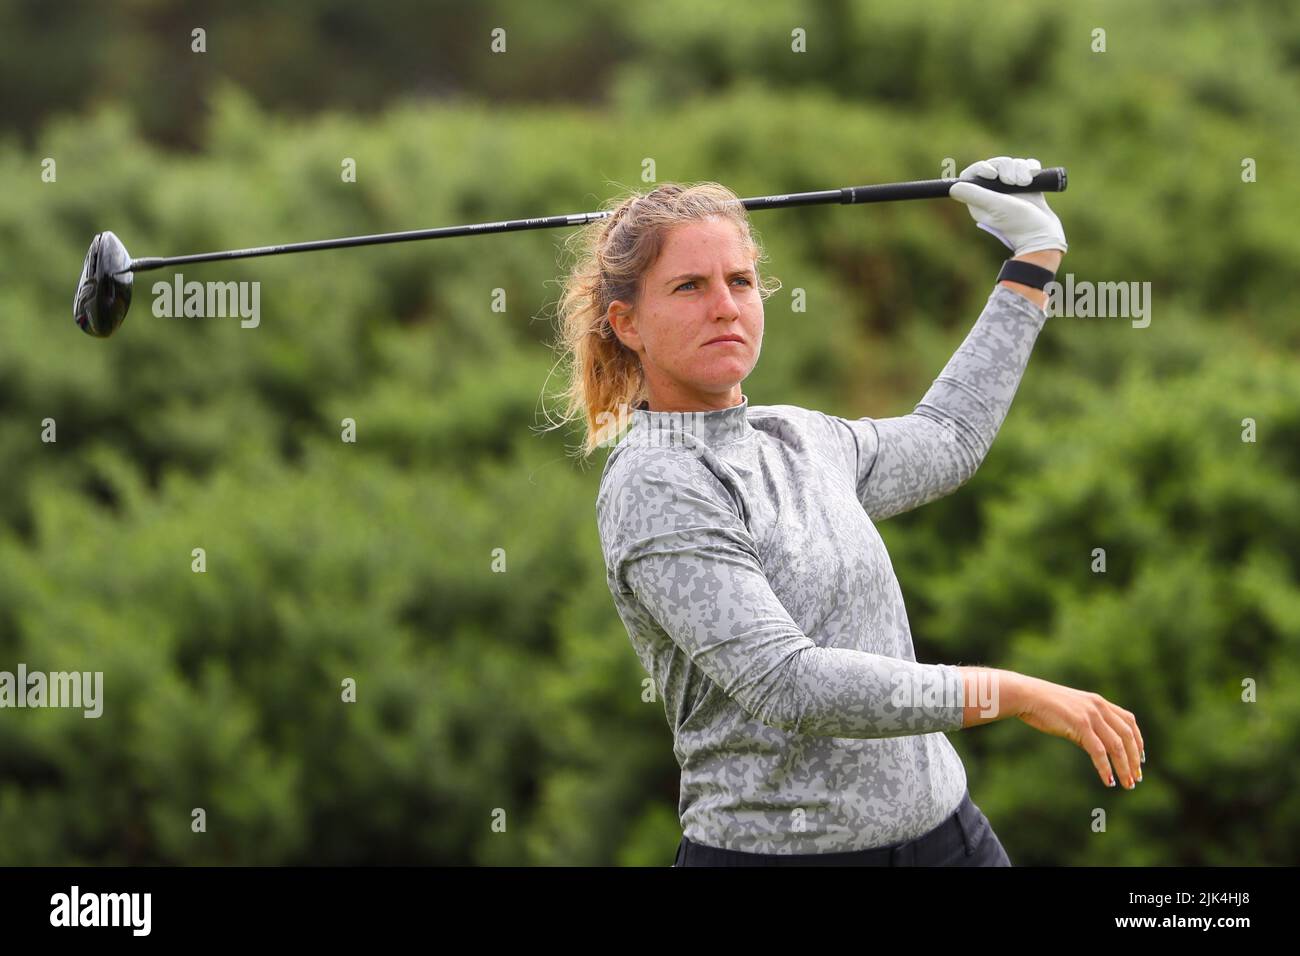 Irvine, UK. 30th July, 2022. The third round of the Trust Golf Women's Scottish Golf took place with 75 players making the cut. Heavy overnight rain from Friday into Saturday made for a softer and more testing course. Leonie Harm teeing off at the 9th. Credit: Findlay/Alamy Live News Stock Photo